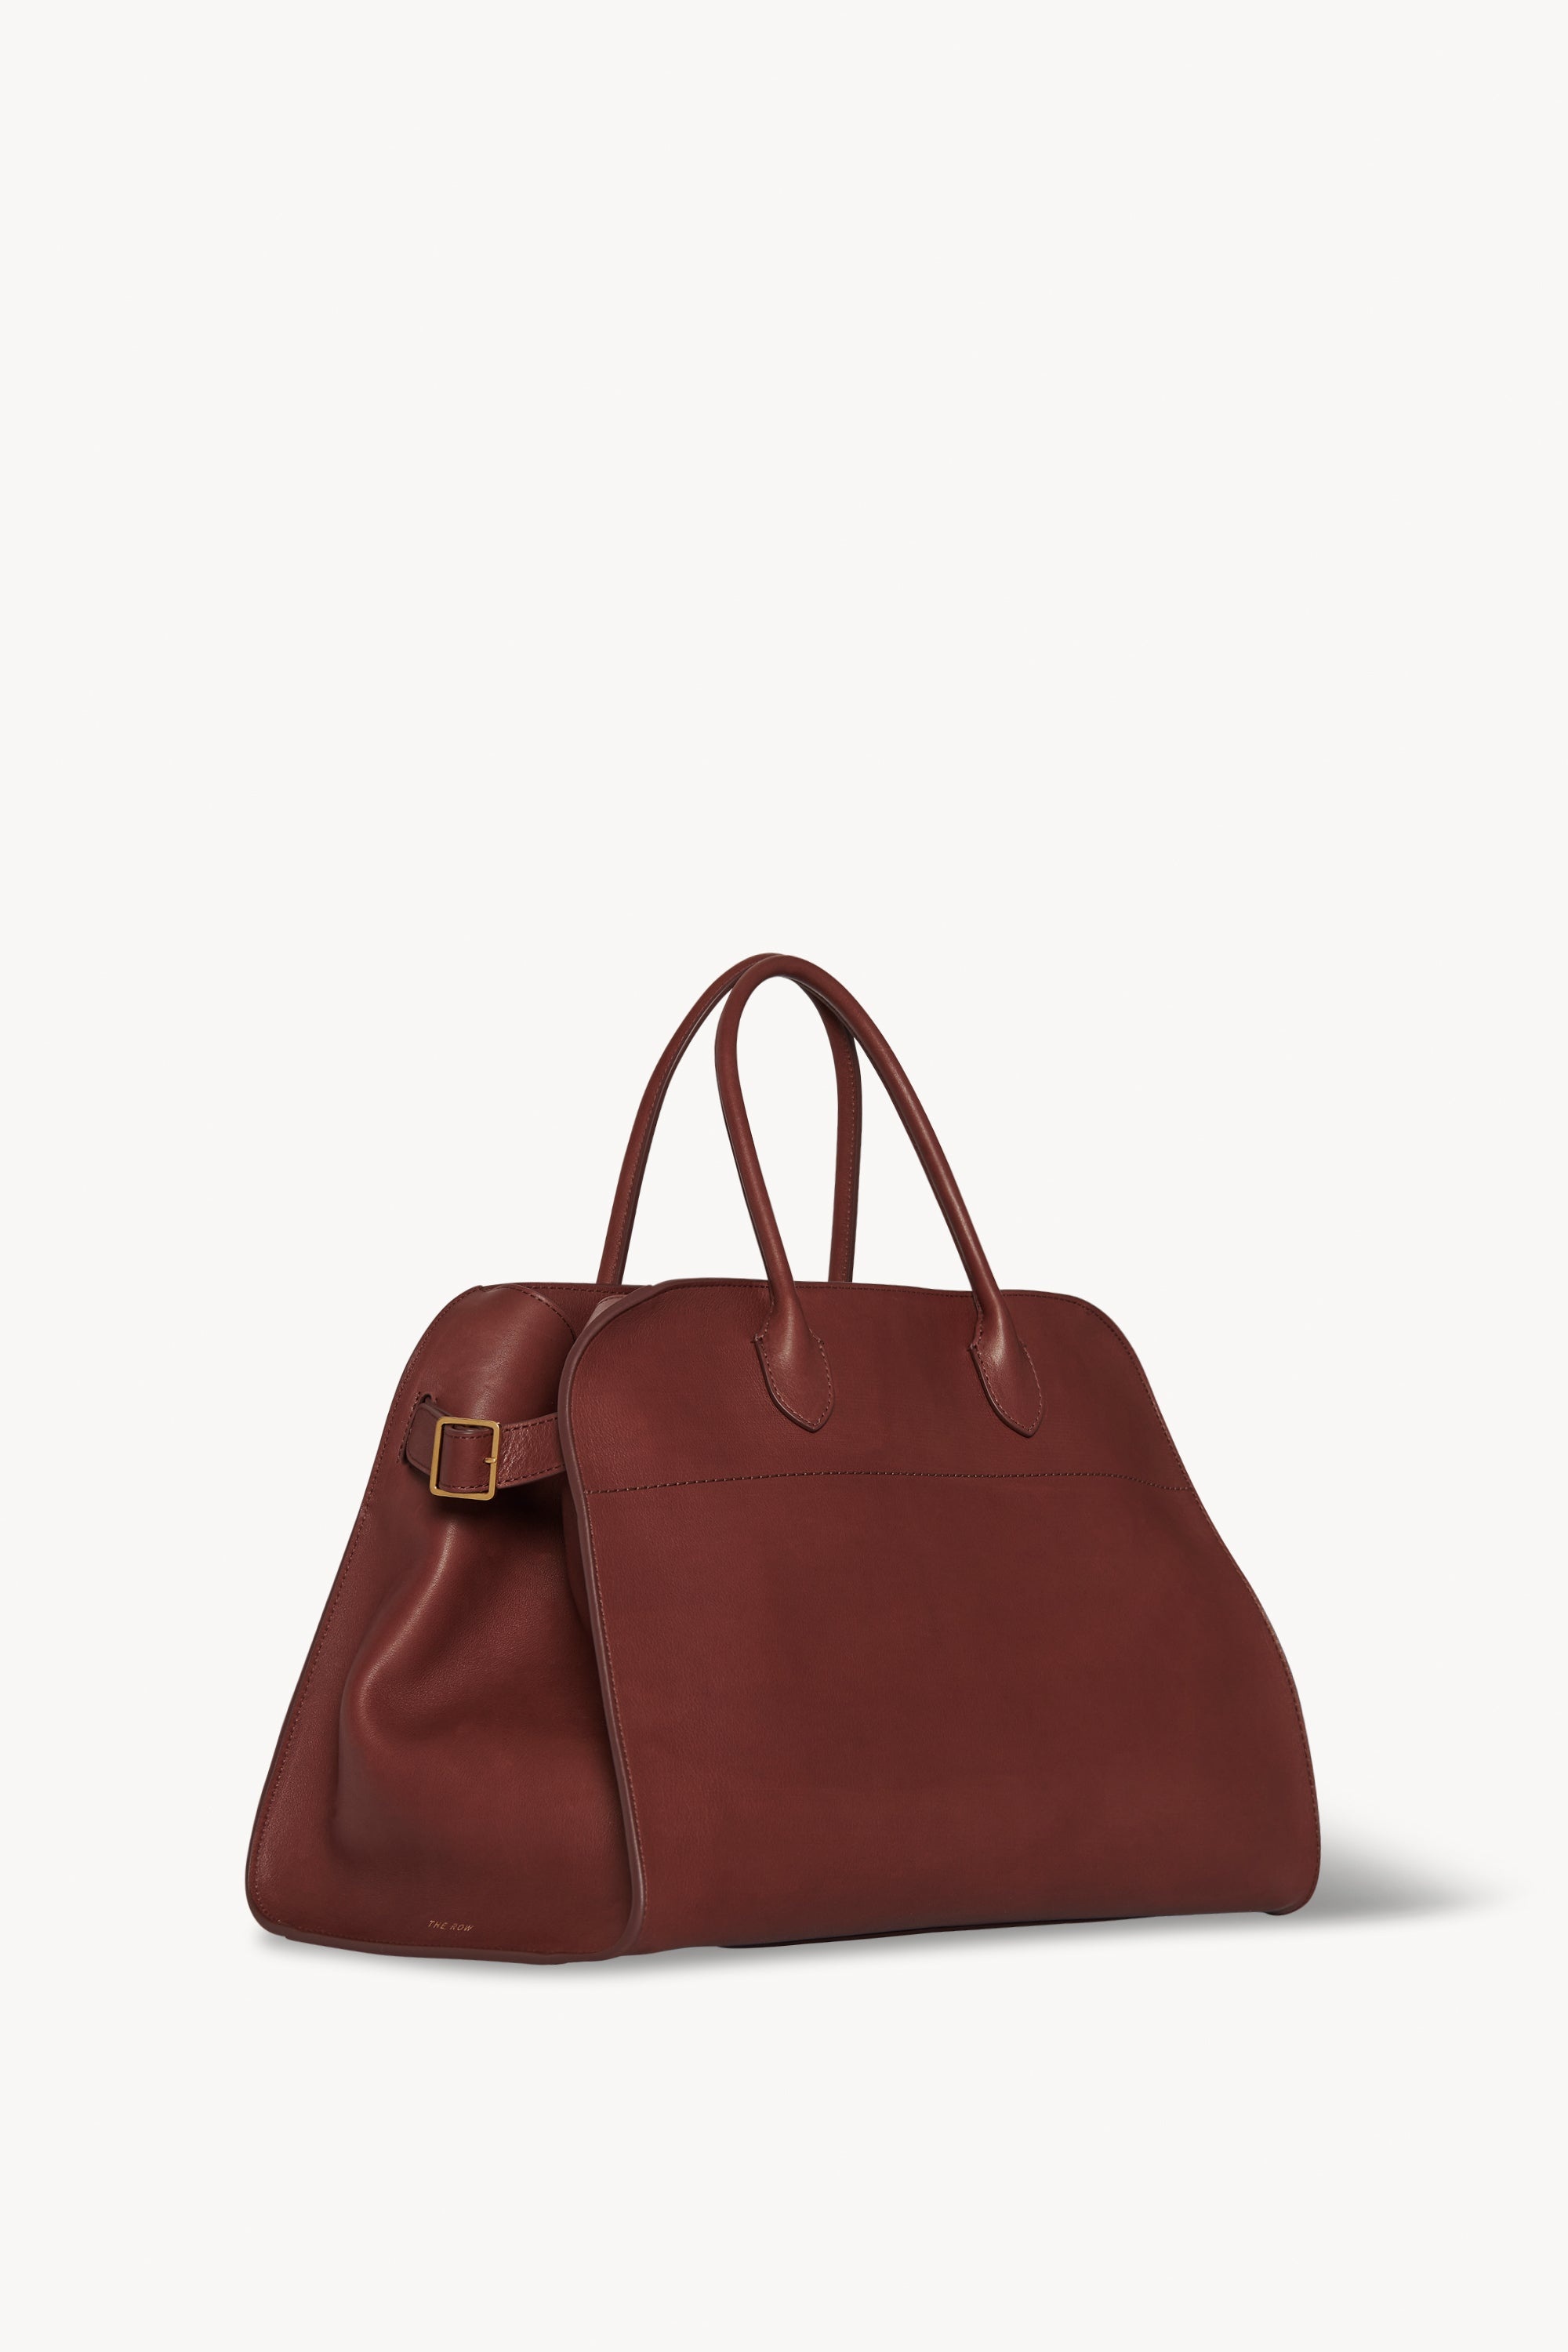 The Row Soft Margaux 15 Bag in Leather | REVERSIBLE